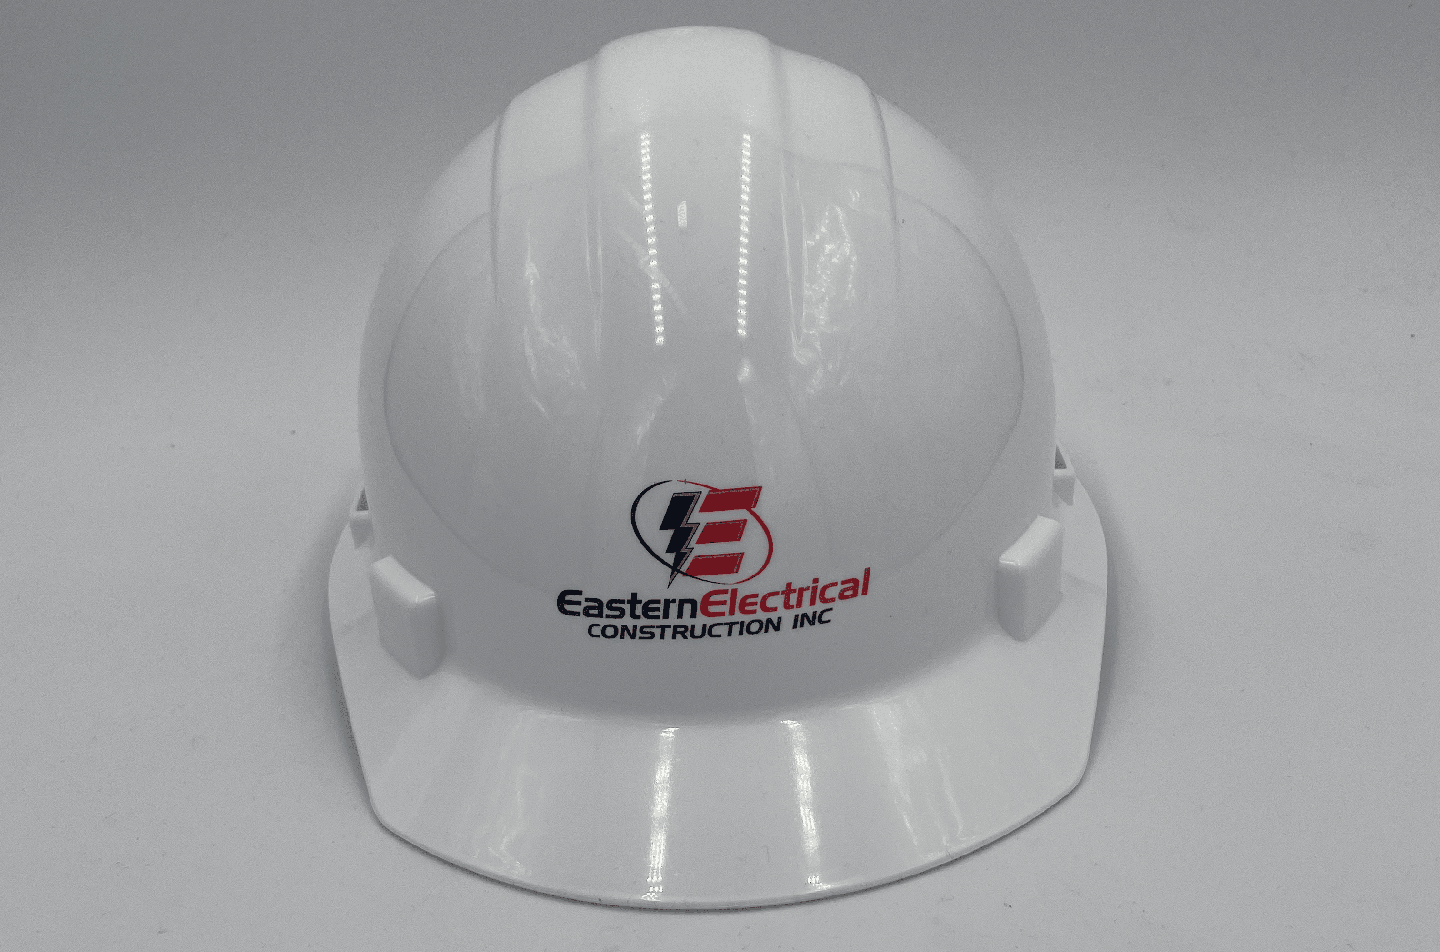 Professional white hard hat showcasing the Eastern Electrical Construction Inc. logo. The safety helmet is detailed with a striking lightning bolt graphic, emphasizing the electrical focus of the company. This essential piece of personal protective equipment is designed to provide both safety and brand identity on the job site.